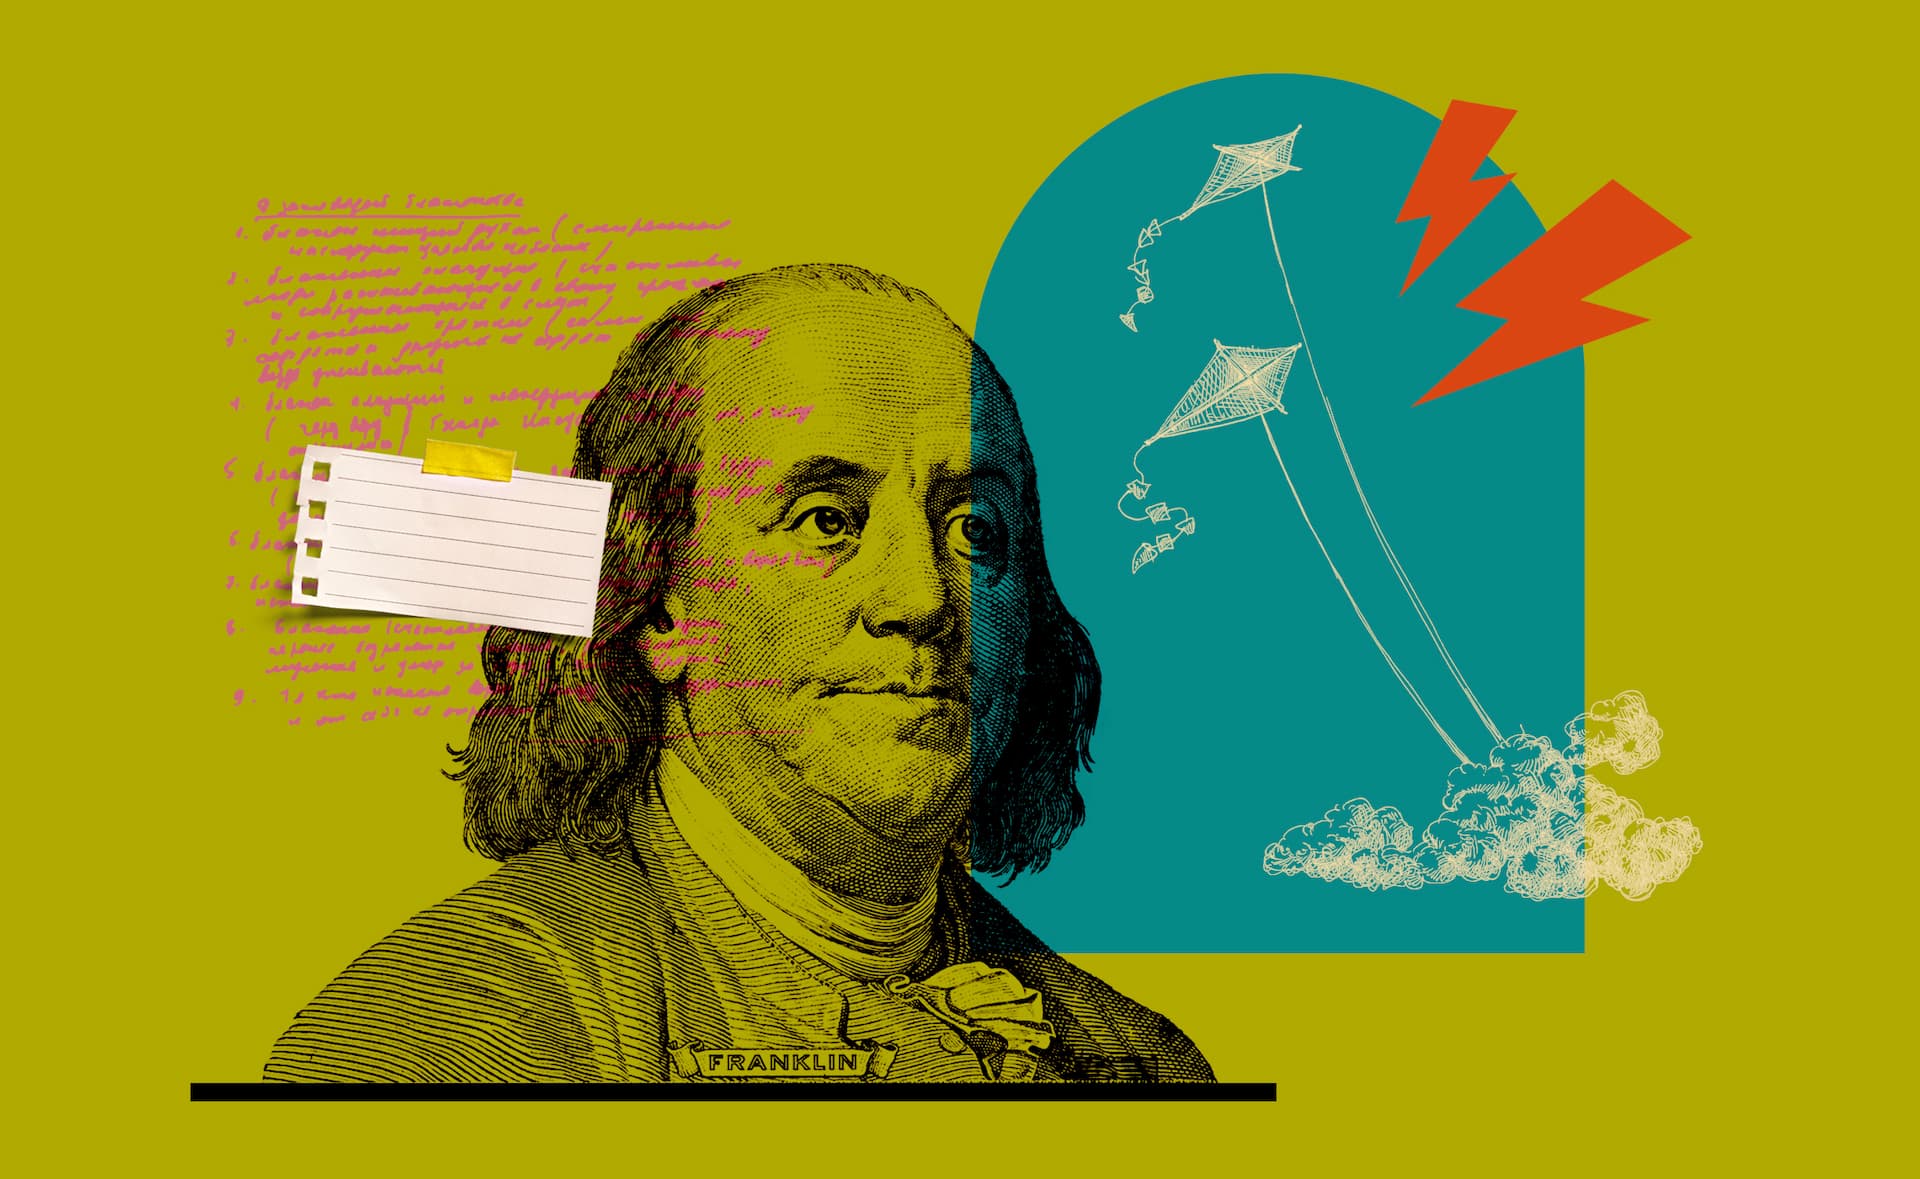 Benjamin Franklin collage on famous launch plan quote